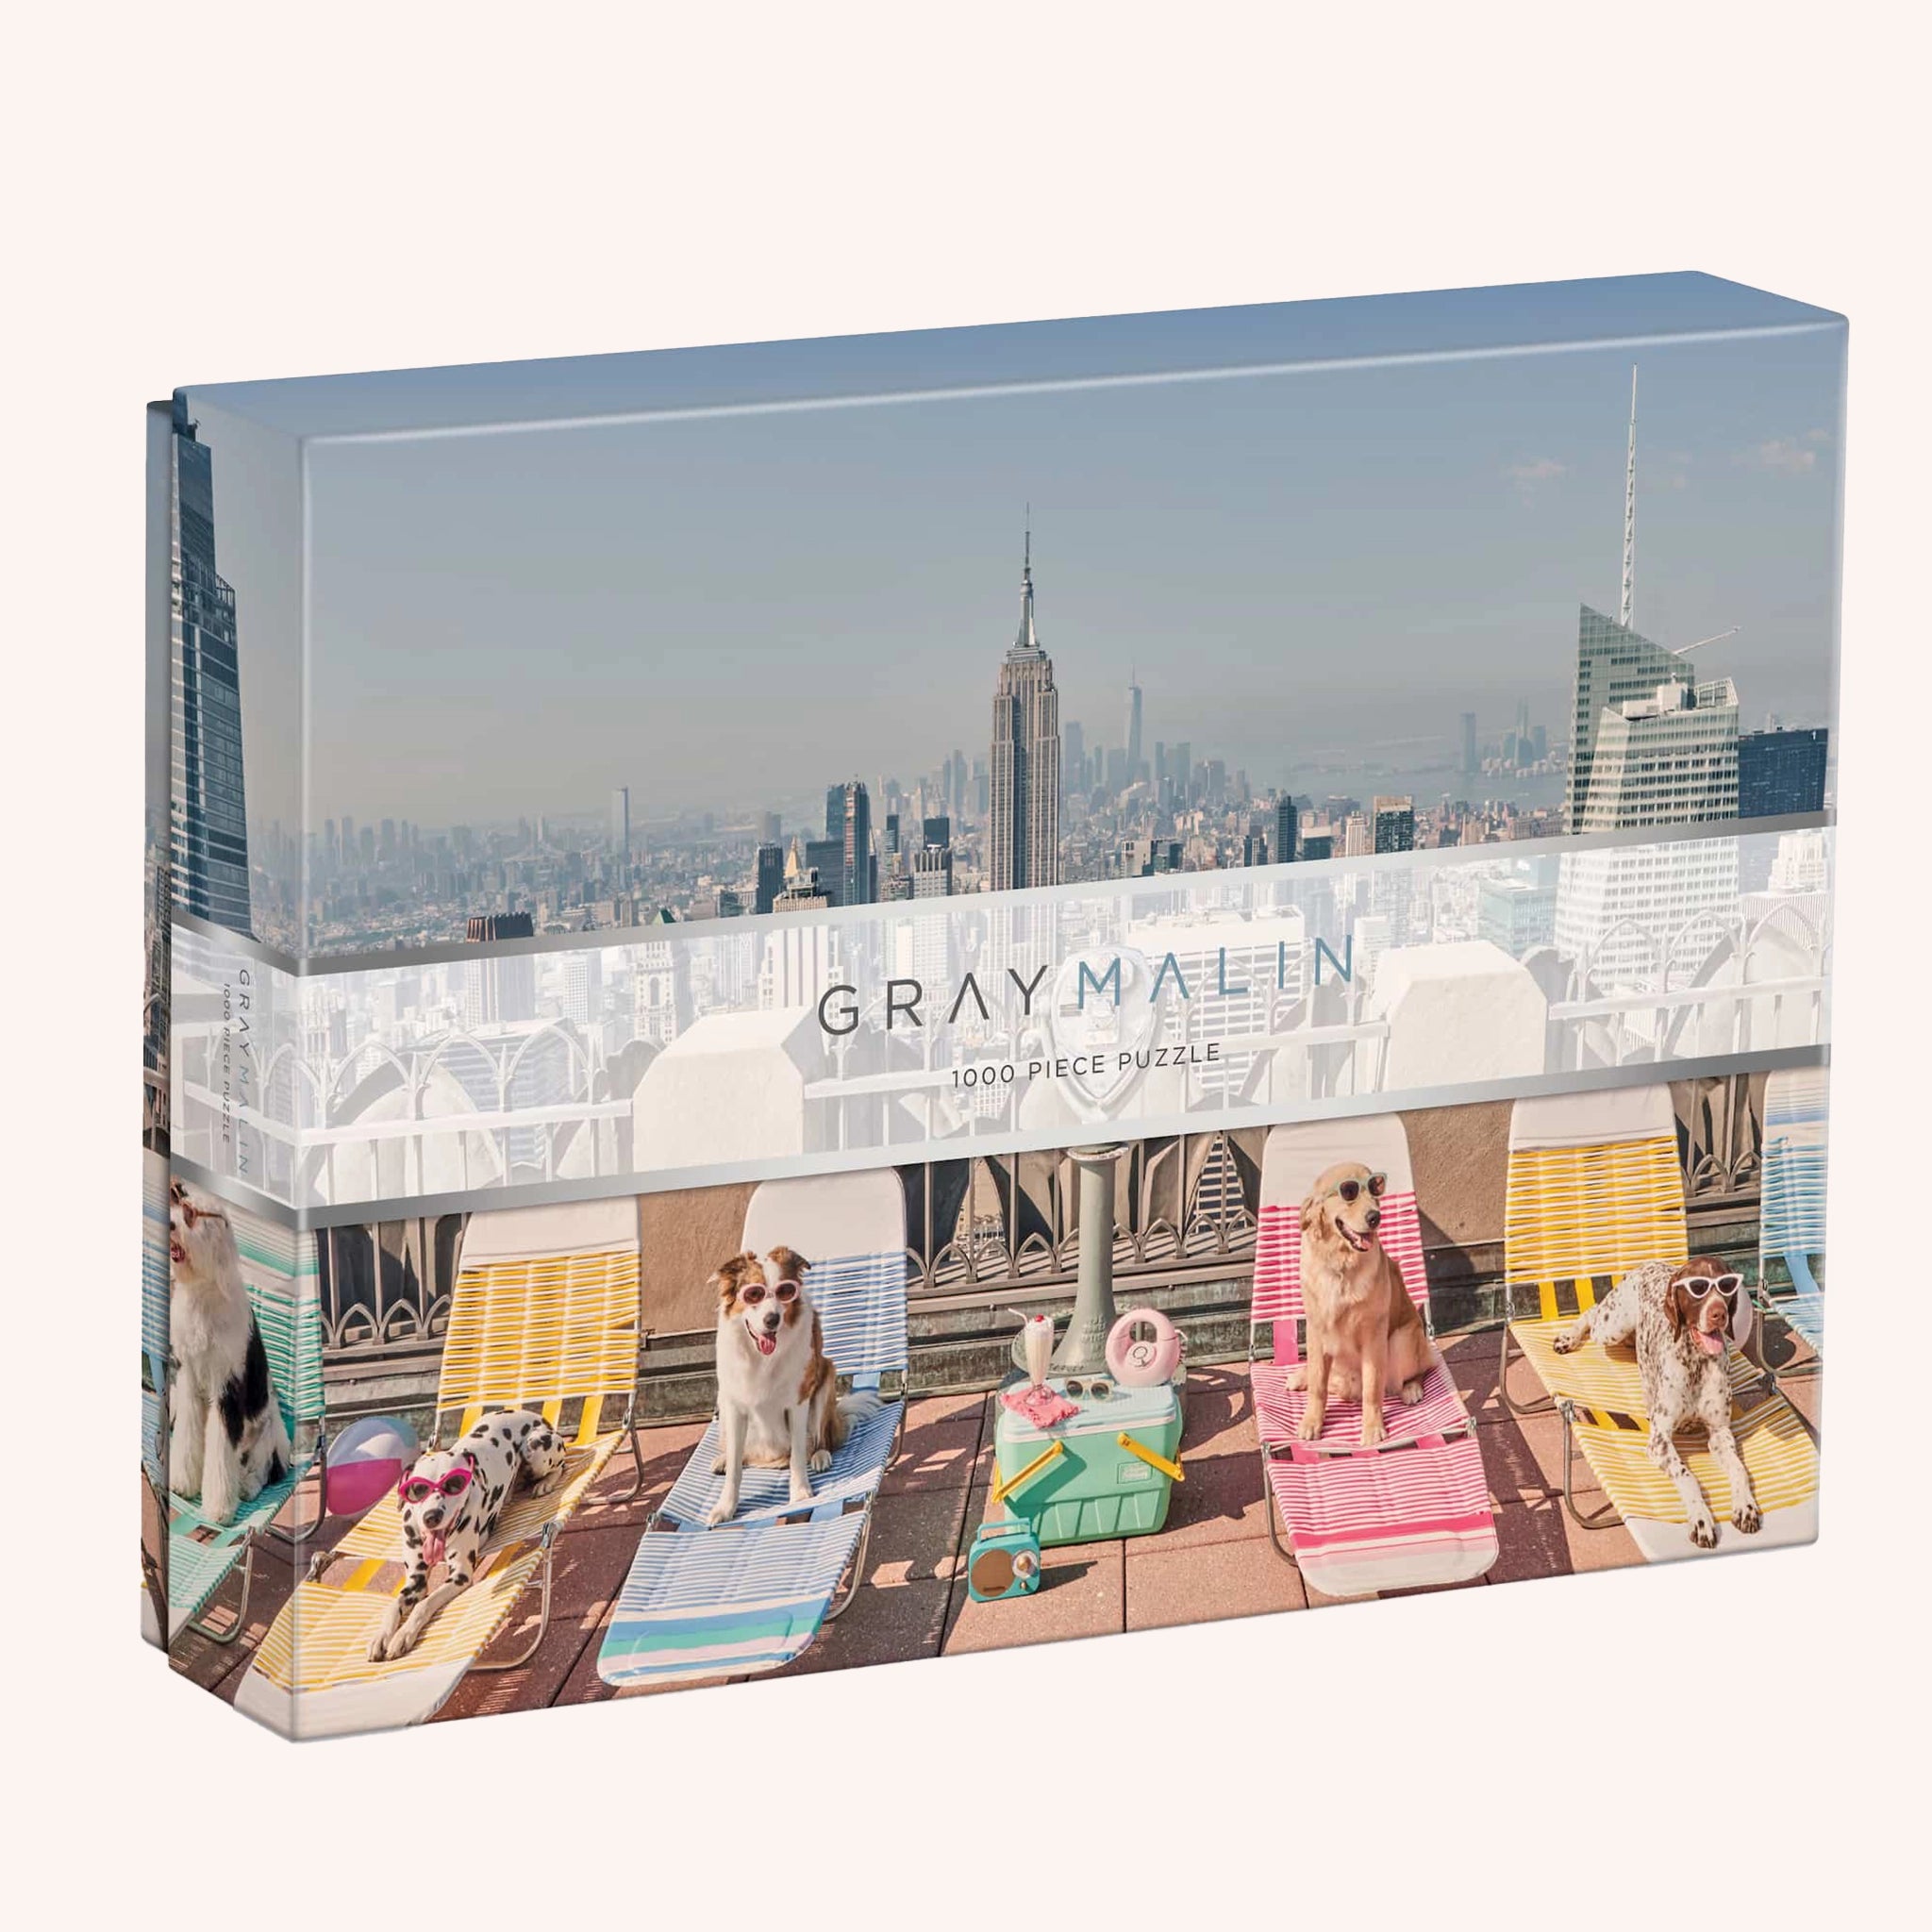 A puzzle in a box with a photograph of New York City with different breeds of dogs wearing sunglasses and sitting on a rooftop on sun chairs.